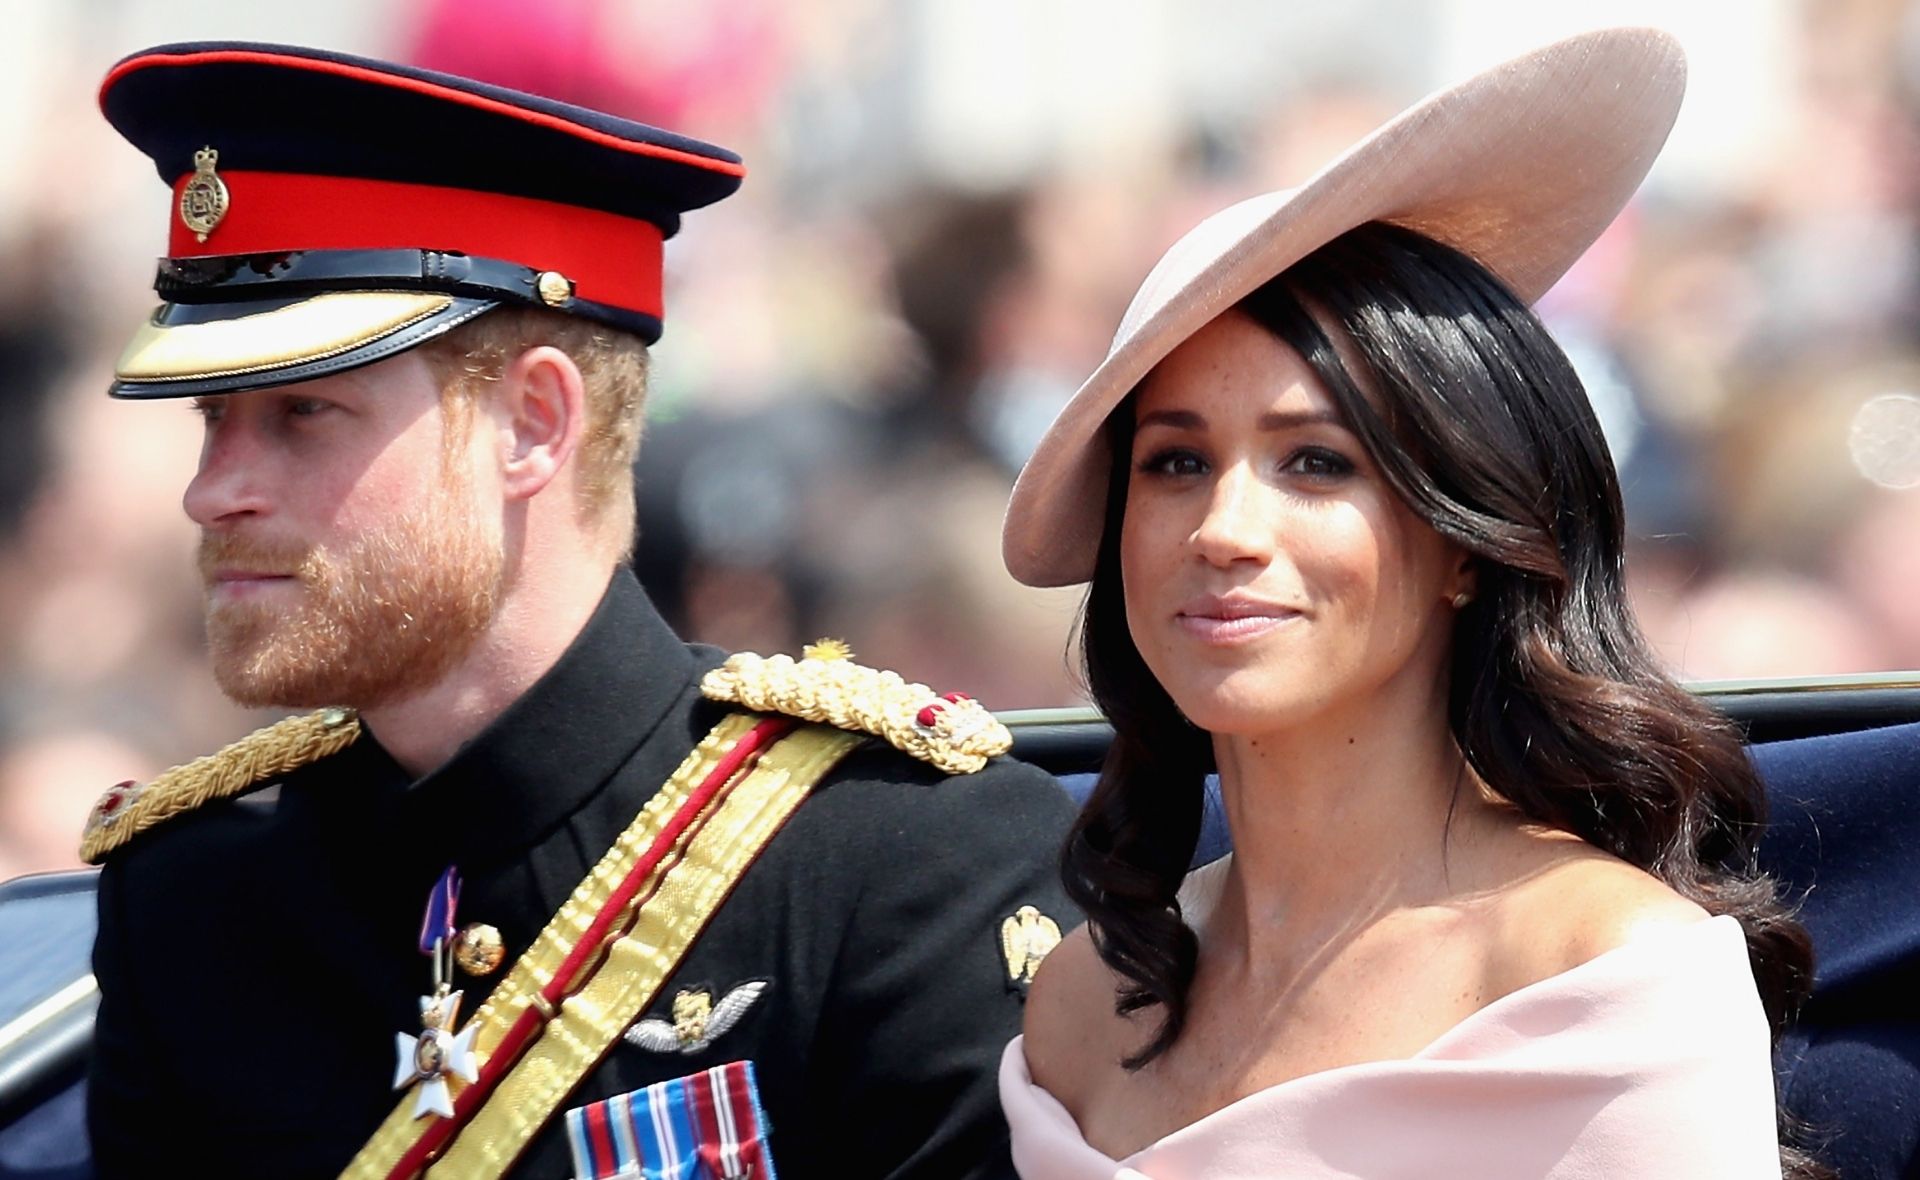 The real reason why Prince Harry and Meghan Markle didn’t stand on the Buckingham Palace balcony with the royals